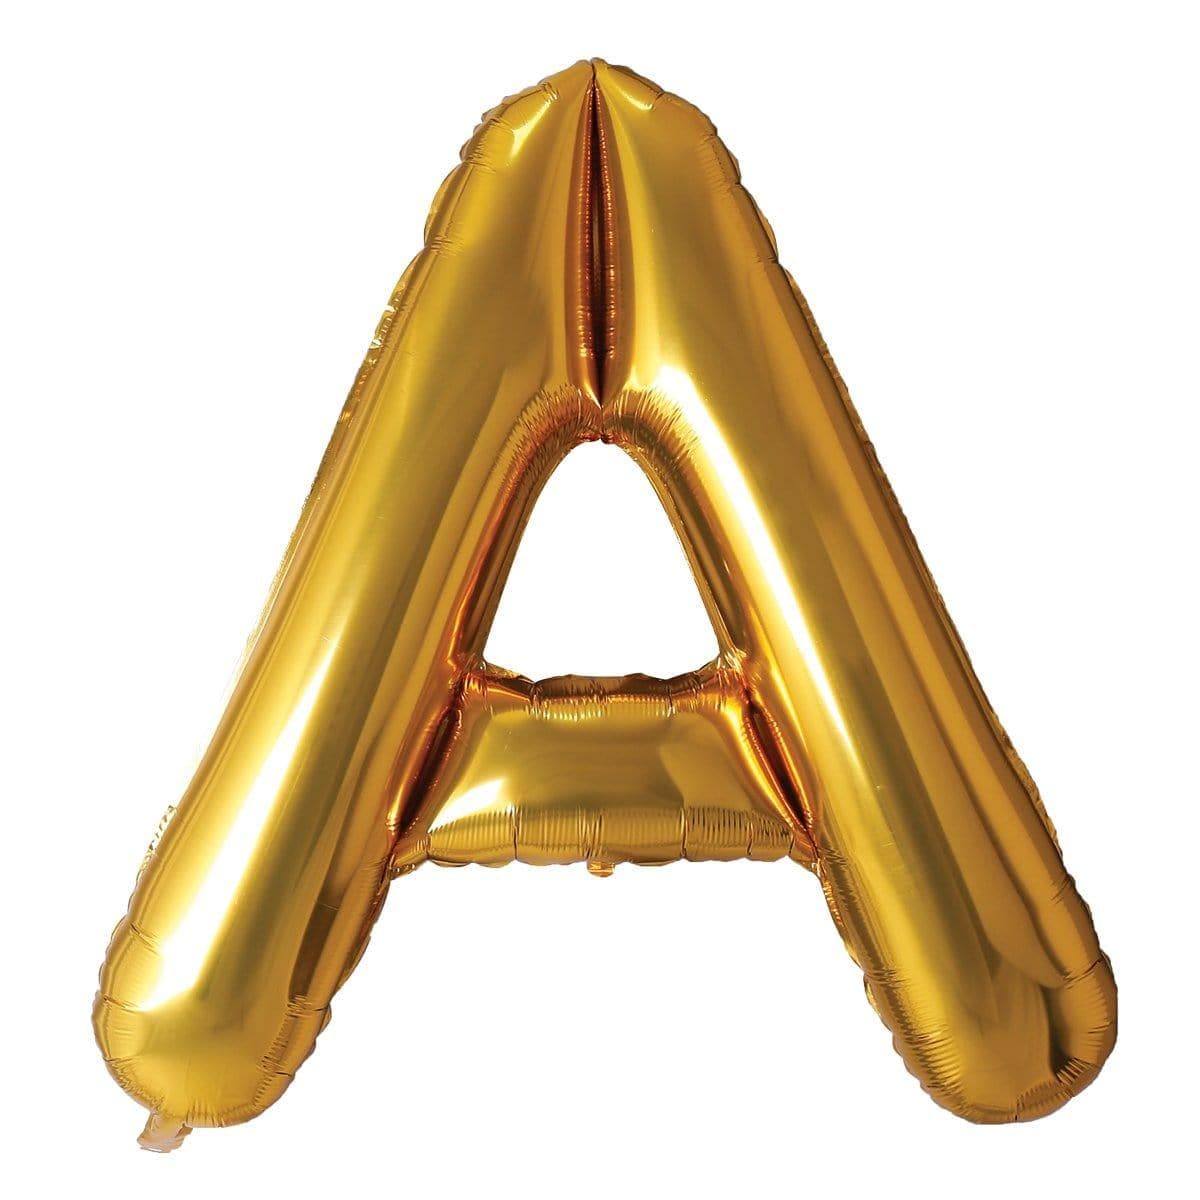 Buy Balloons Gold Letter A Foil Balloon, 34 Inches sold at Party Expert